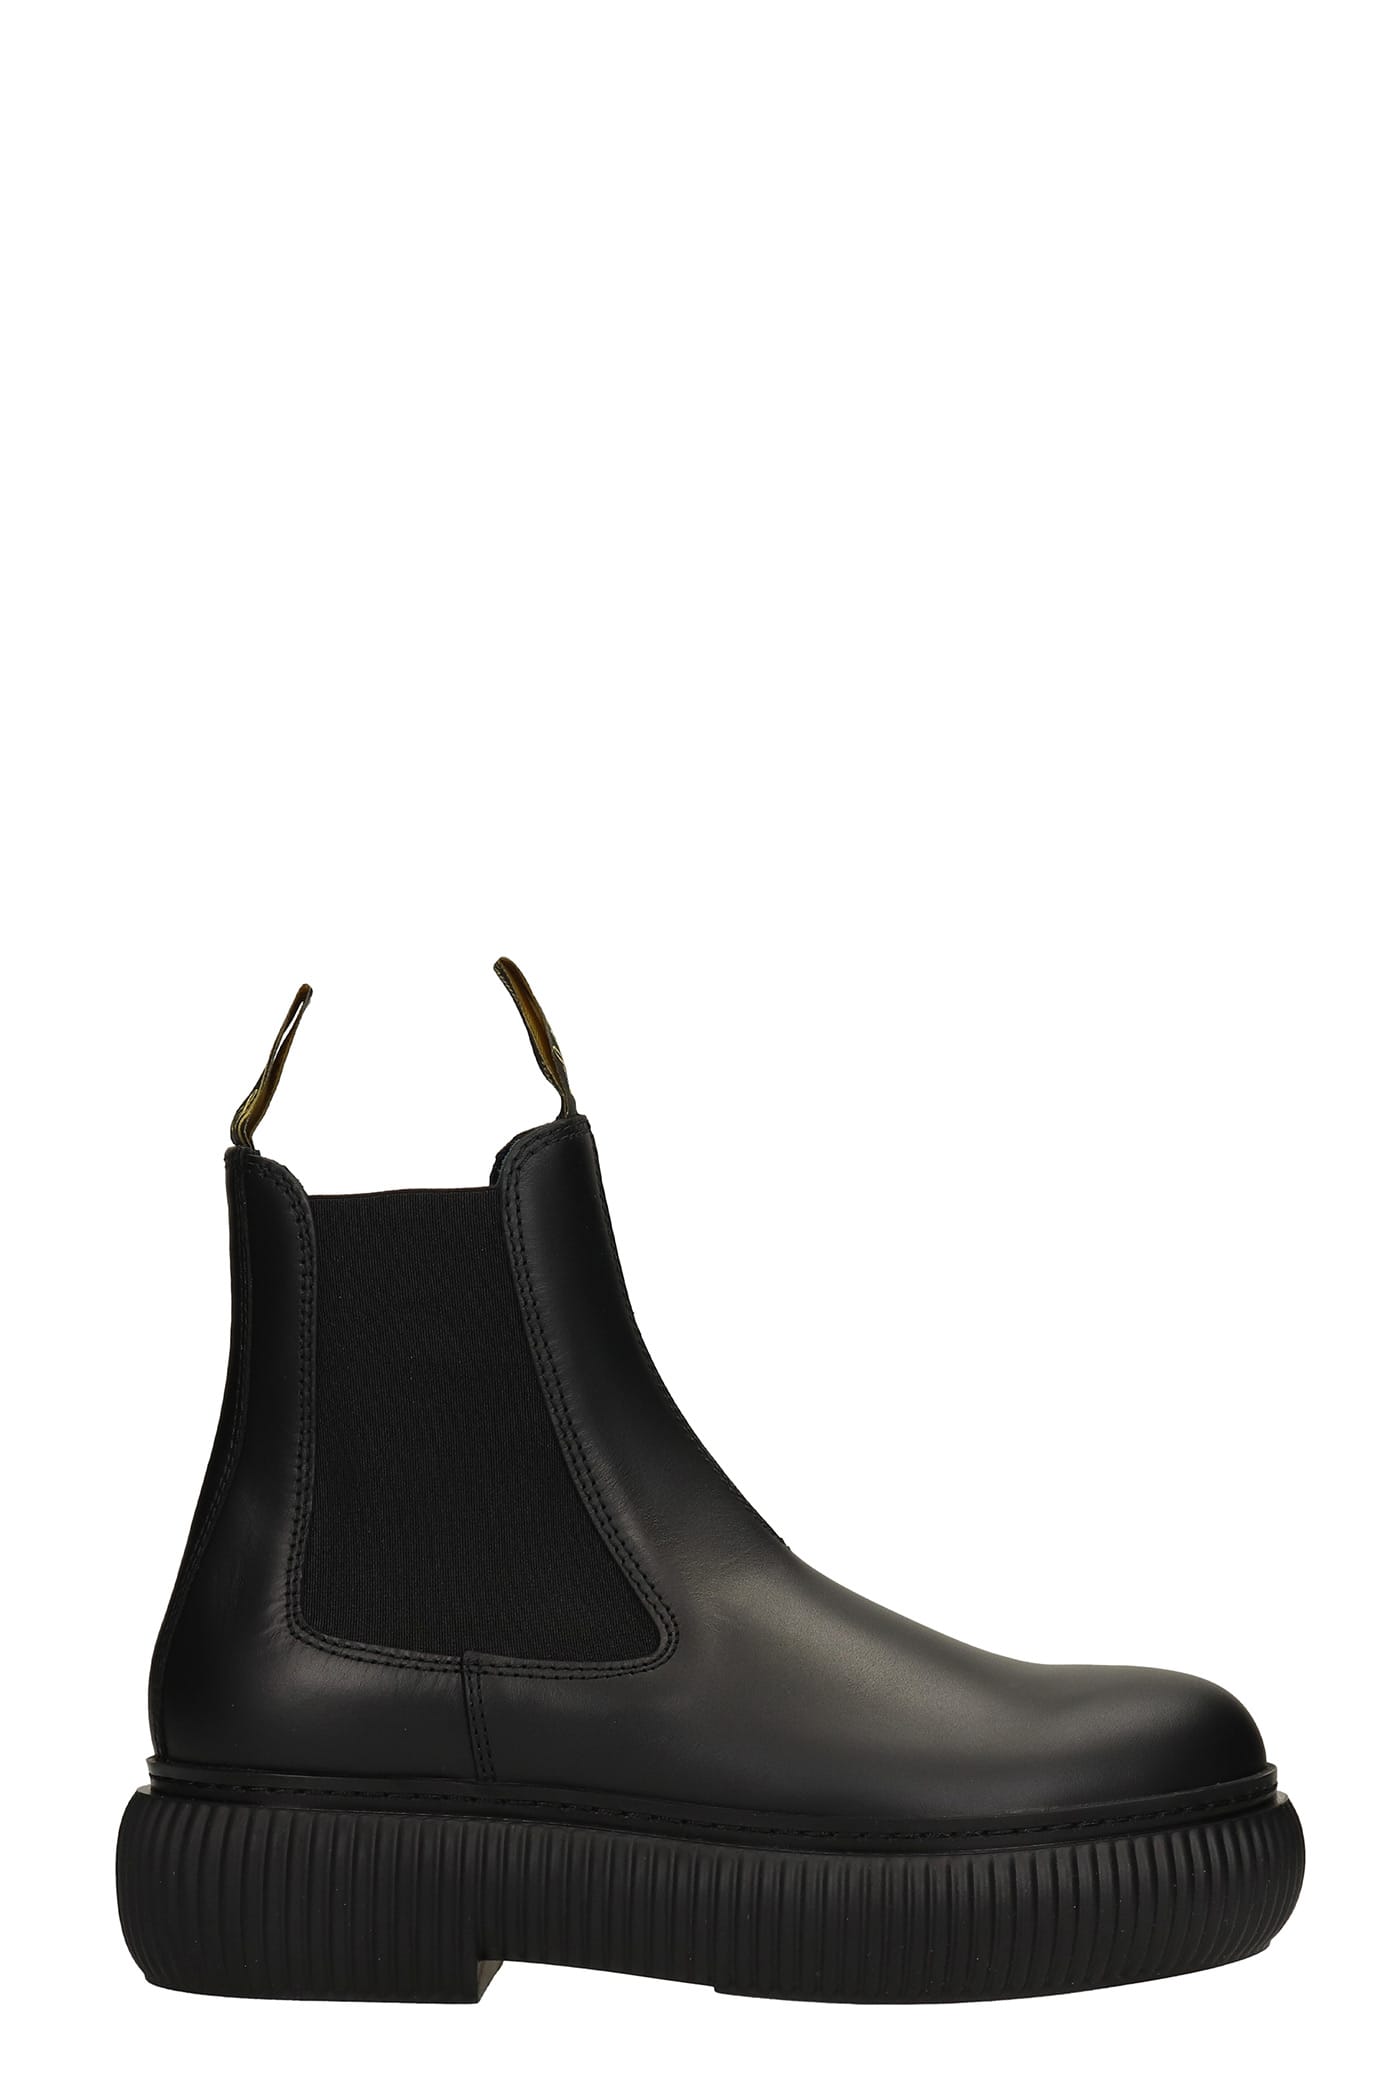 Lanvin Low Heels Ankle Boots In Black Leather